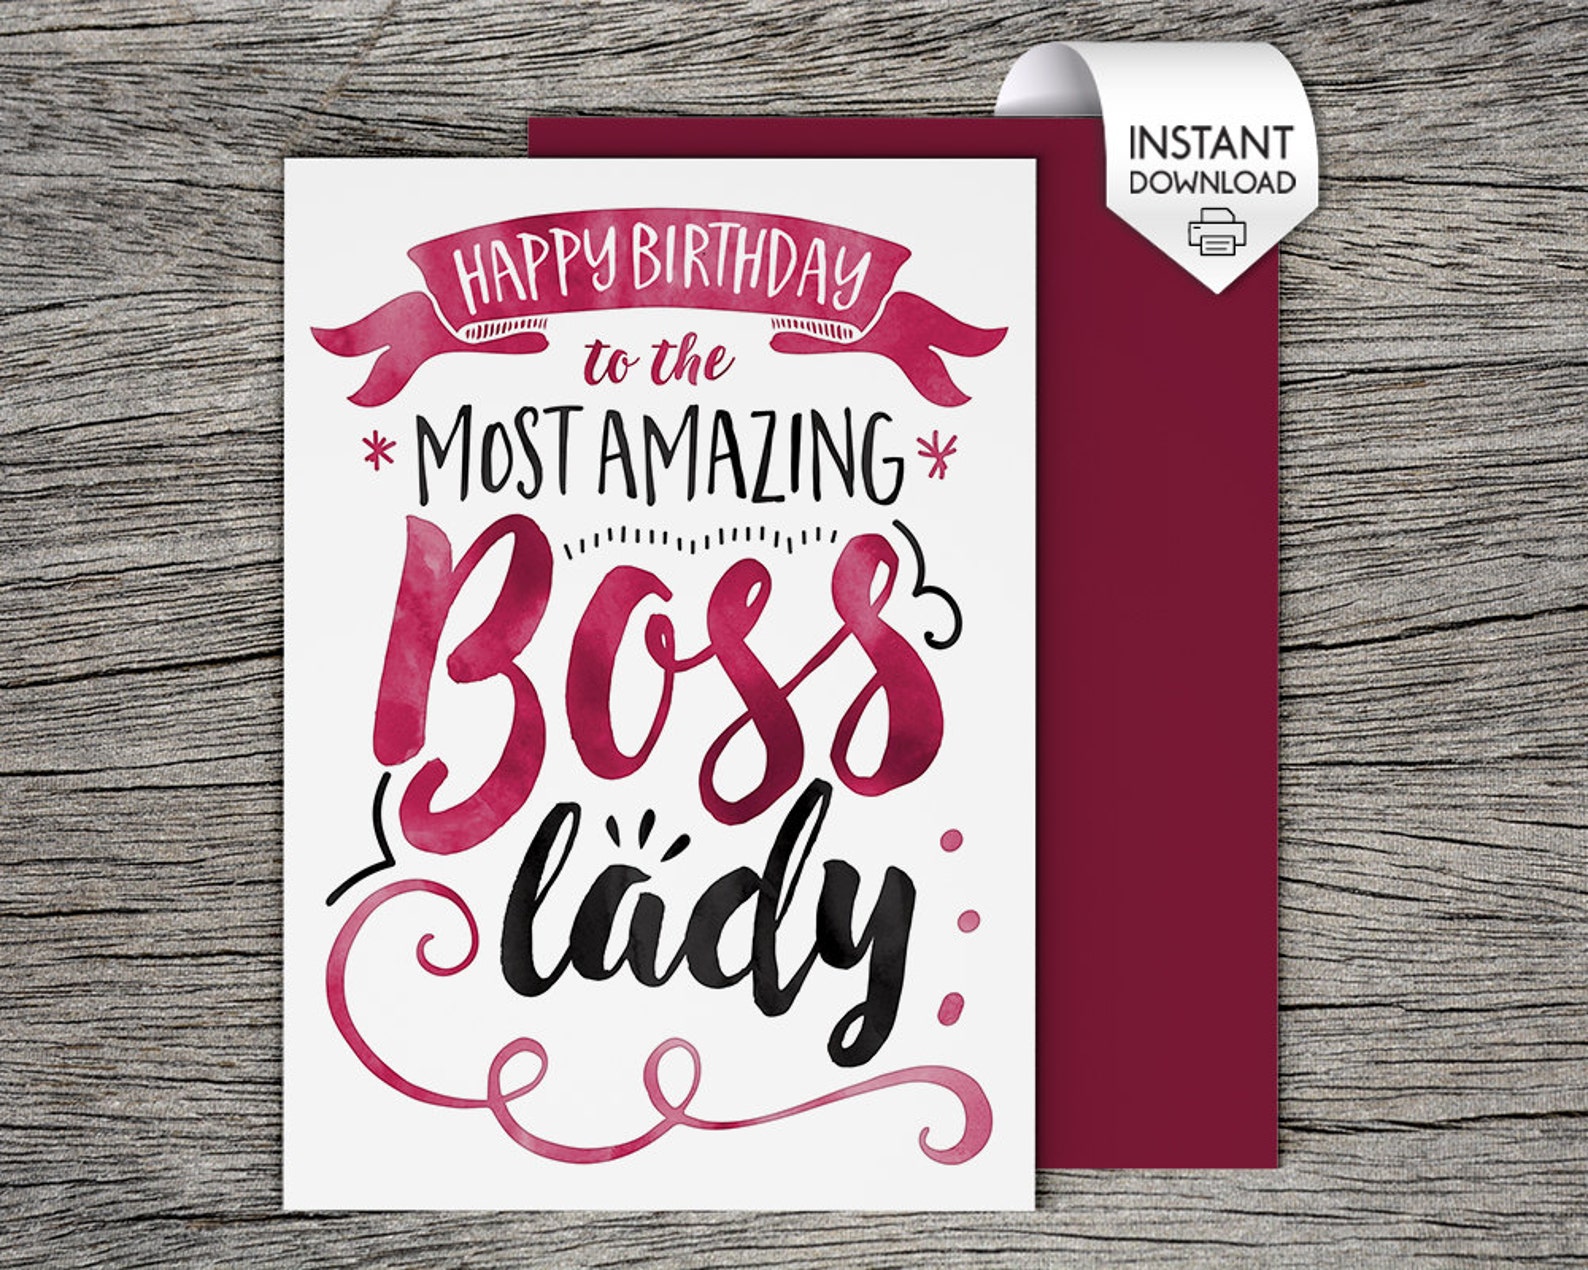 Printable Card Happy Birthday To The Most Amazing Boss Lady Etsy